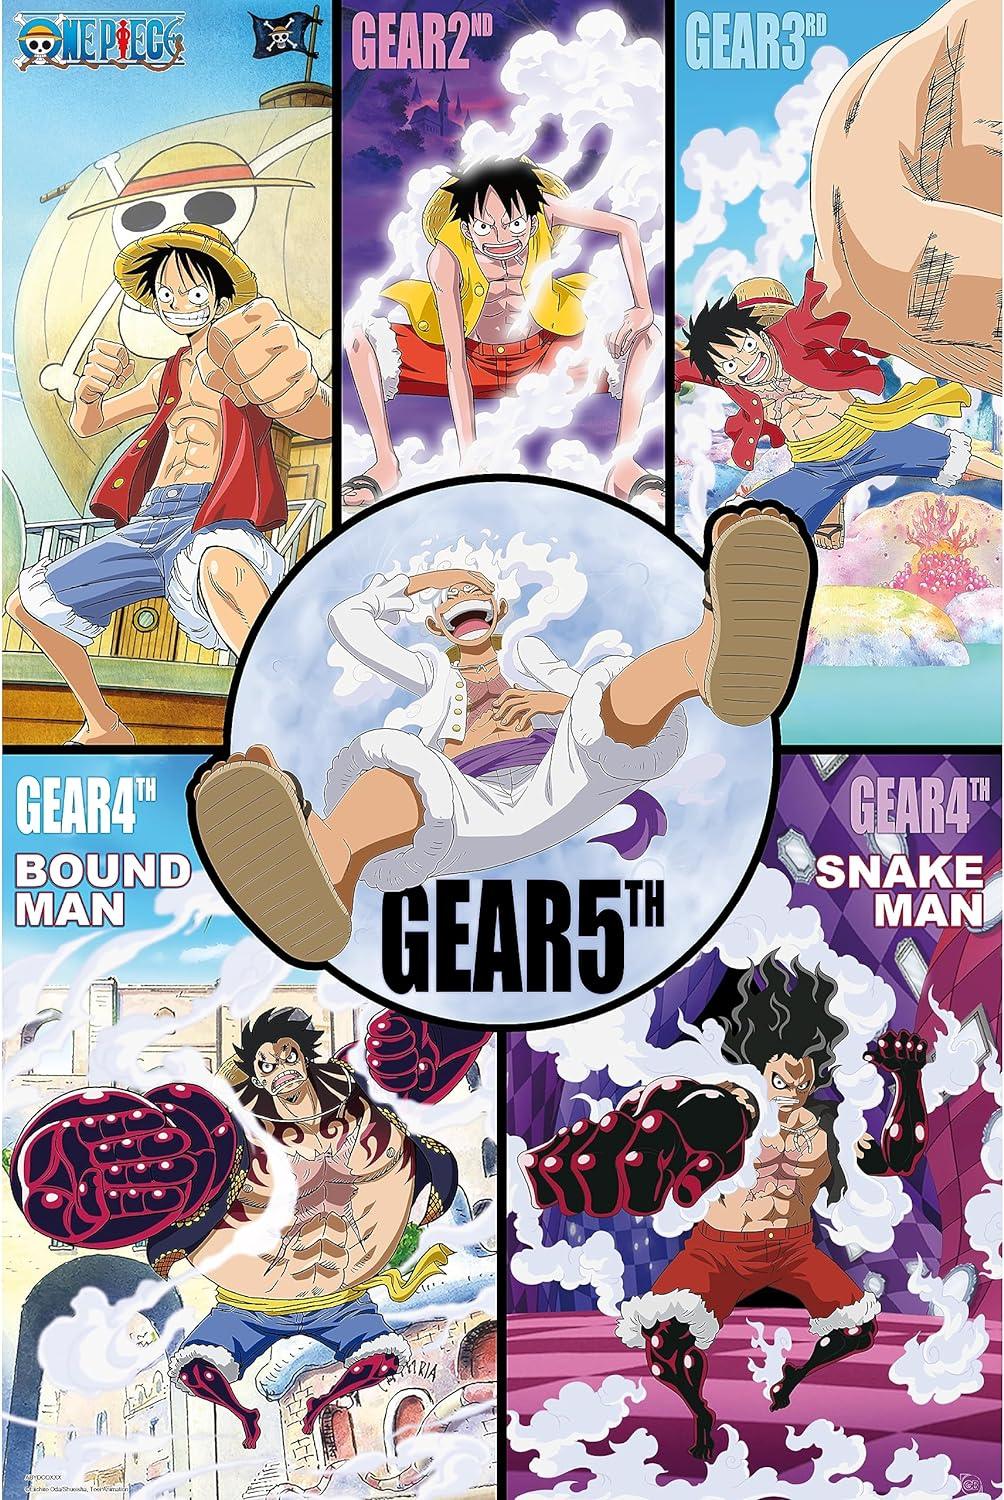 ONE PIECE - Poster Monkey D. Luffy Gear 5th History 61x91,5 cm - Magic Dreams Store